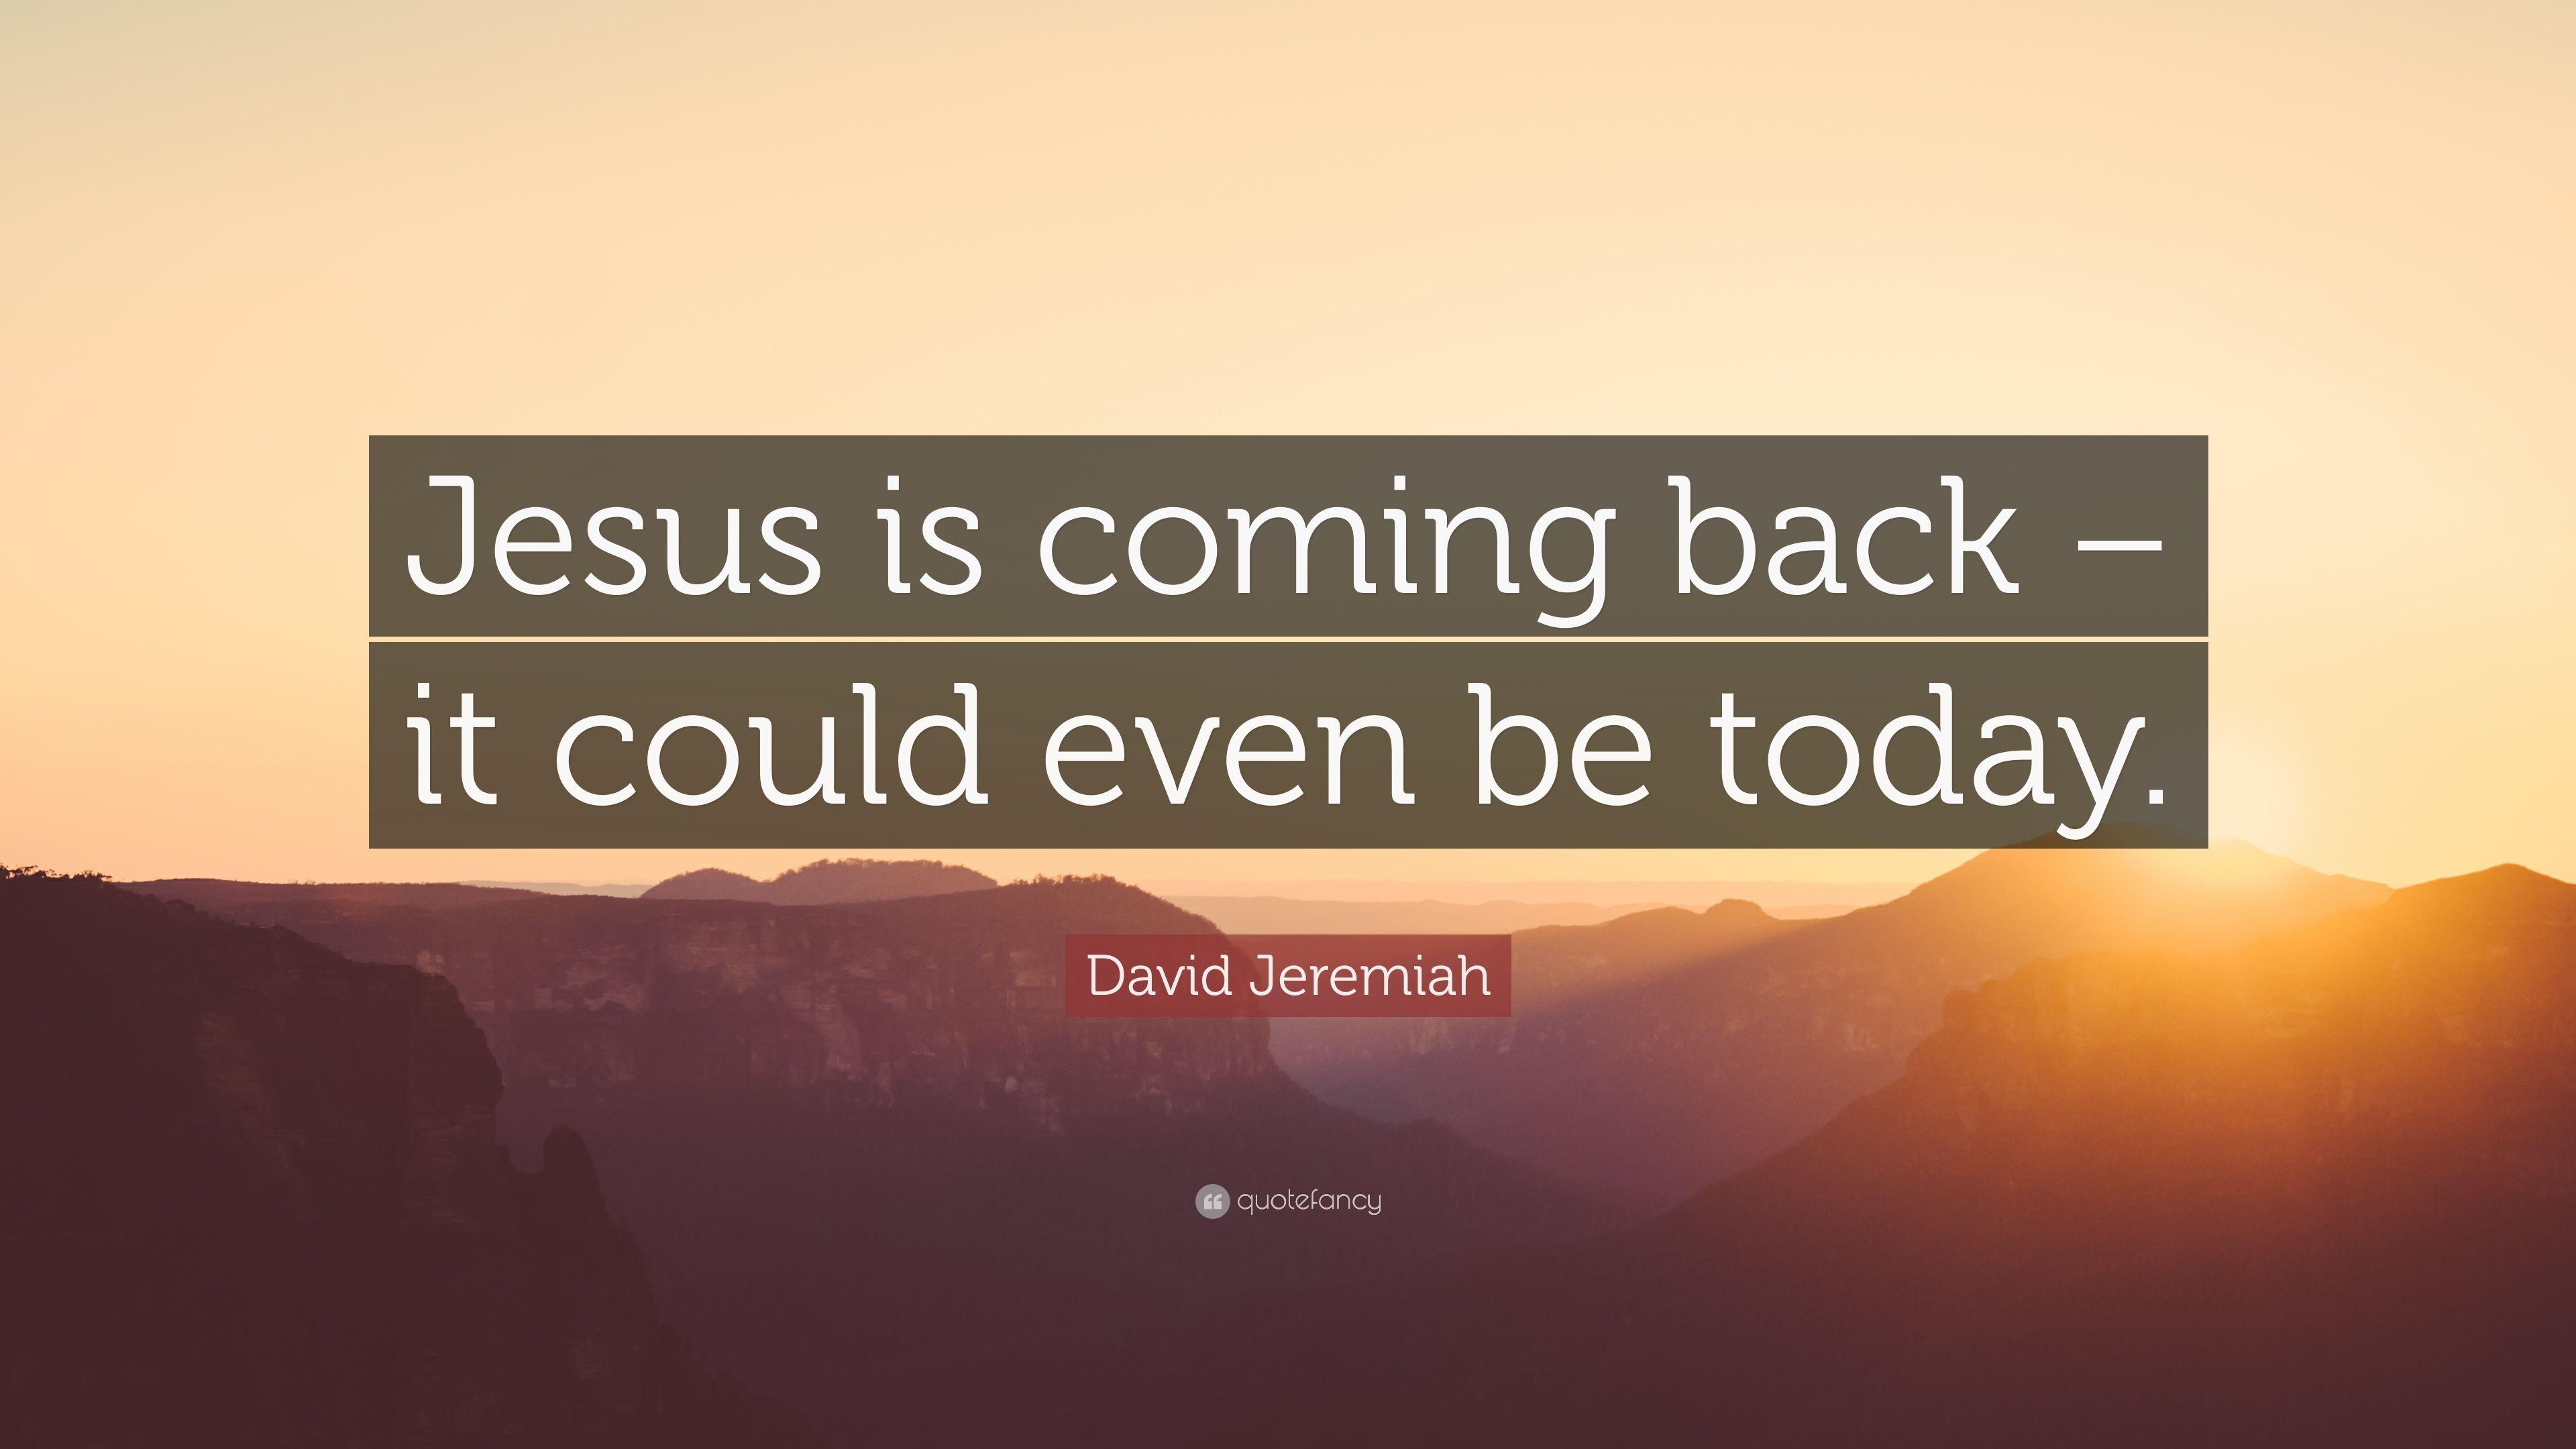 David Jeremiah Quote: "Jesus is coming back - it could even be today. 